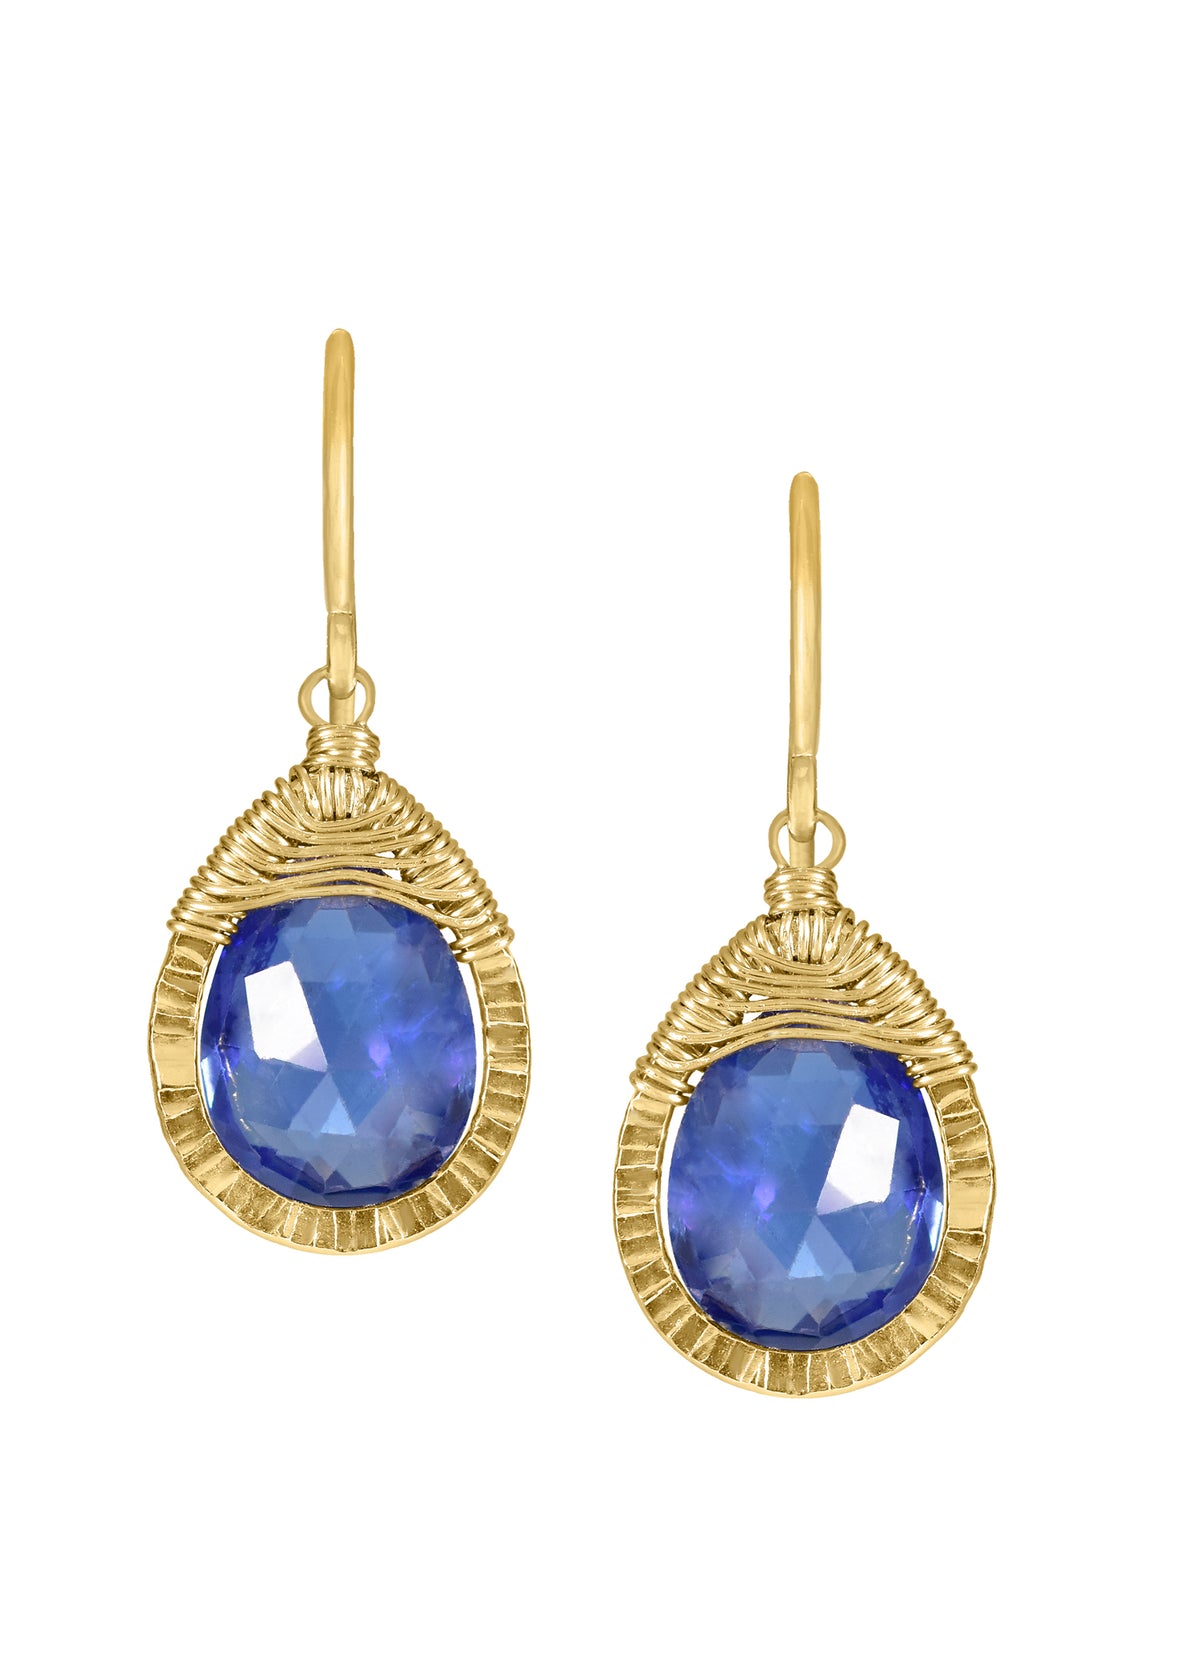 Kyanite 14k gold fill Earrings measure 15/16&quot; in length (including the ear wires) and 3/8&quot; in width at the widest point Handmade in our Los Angeles studio